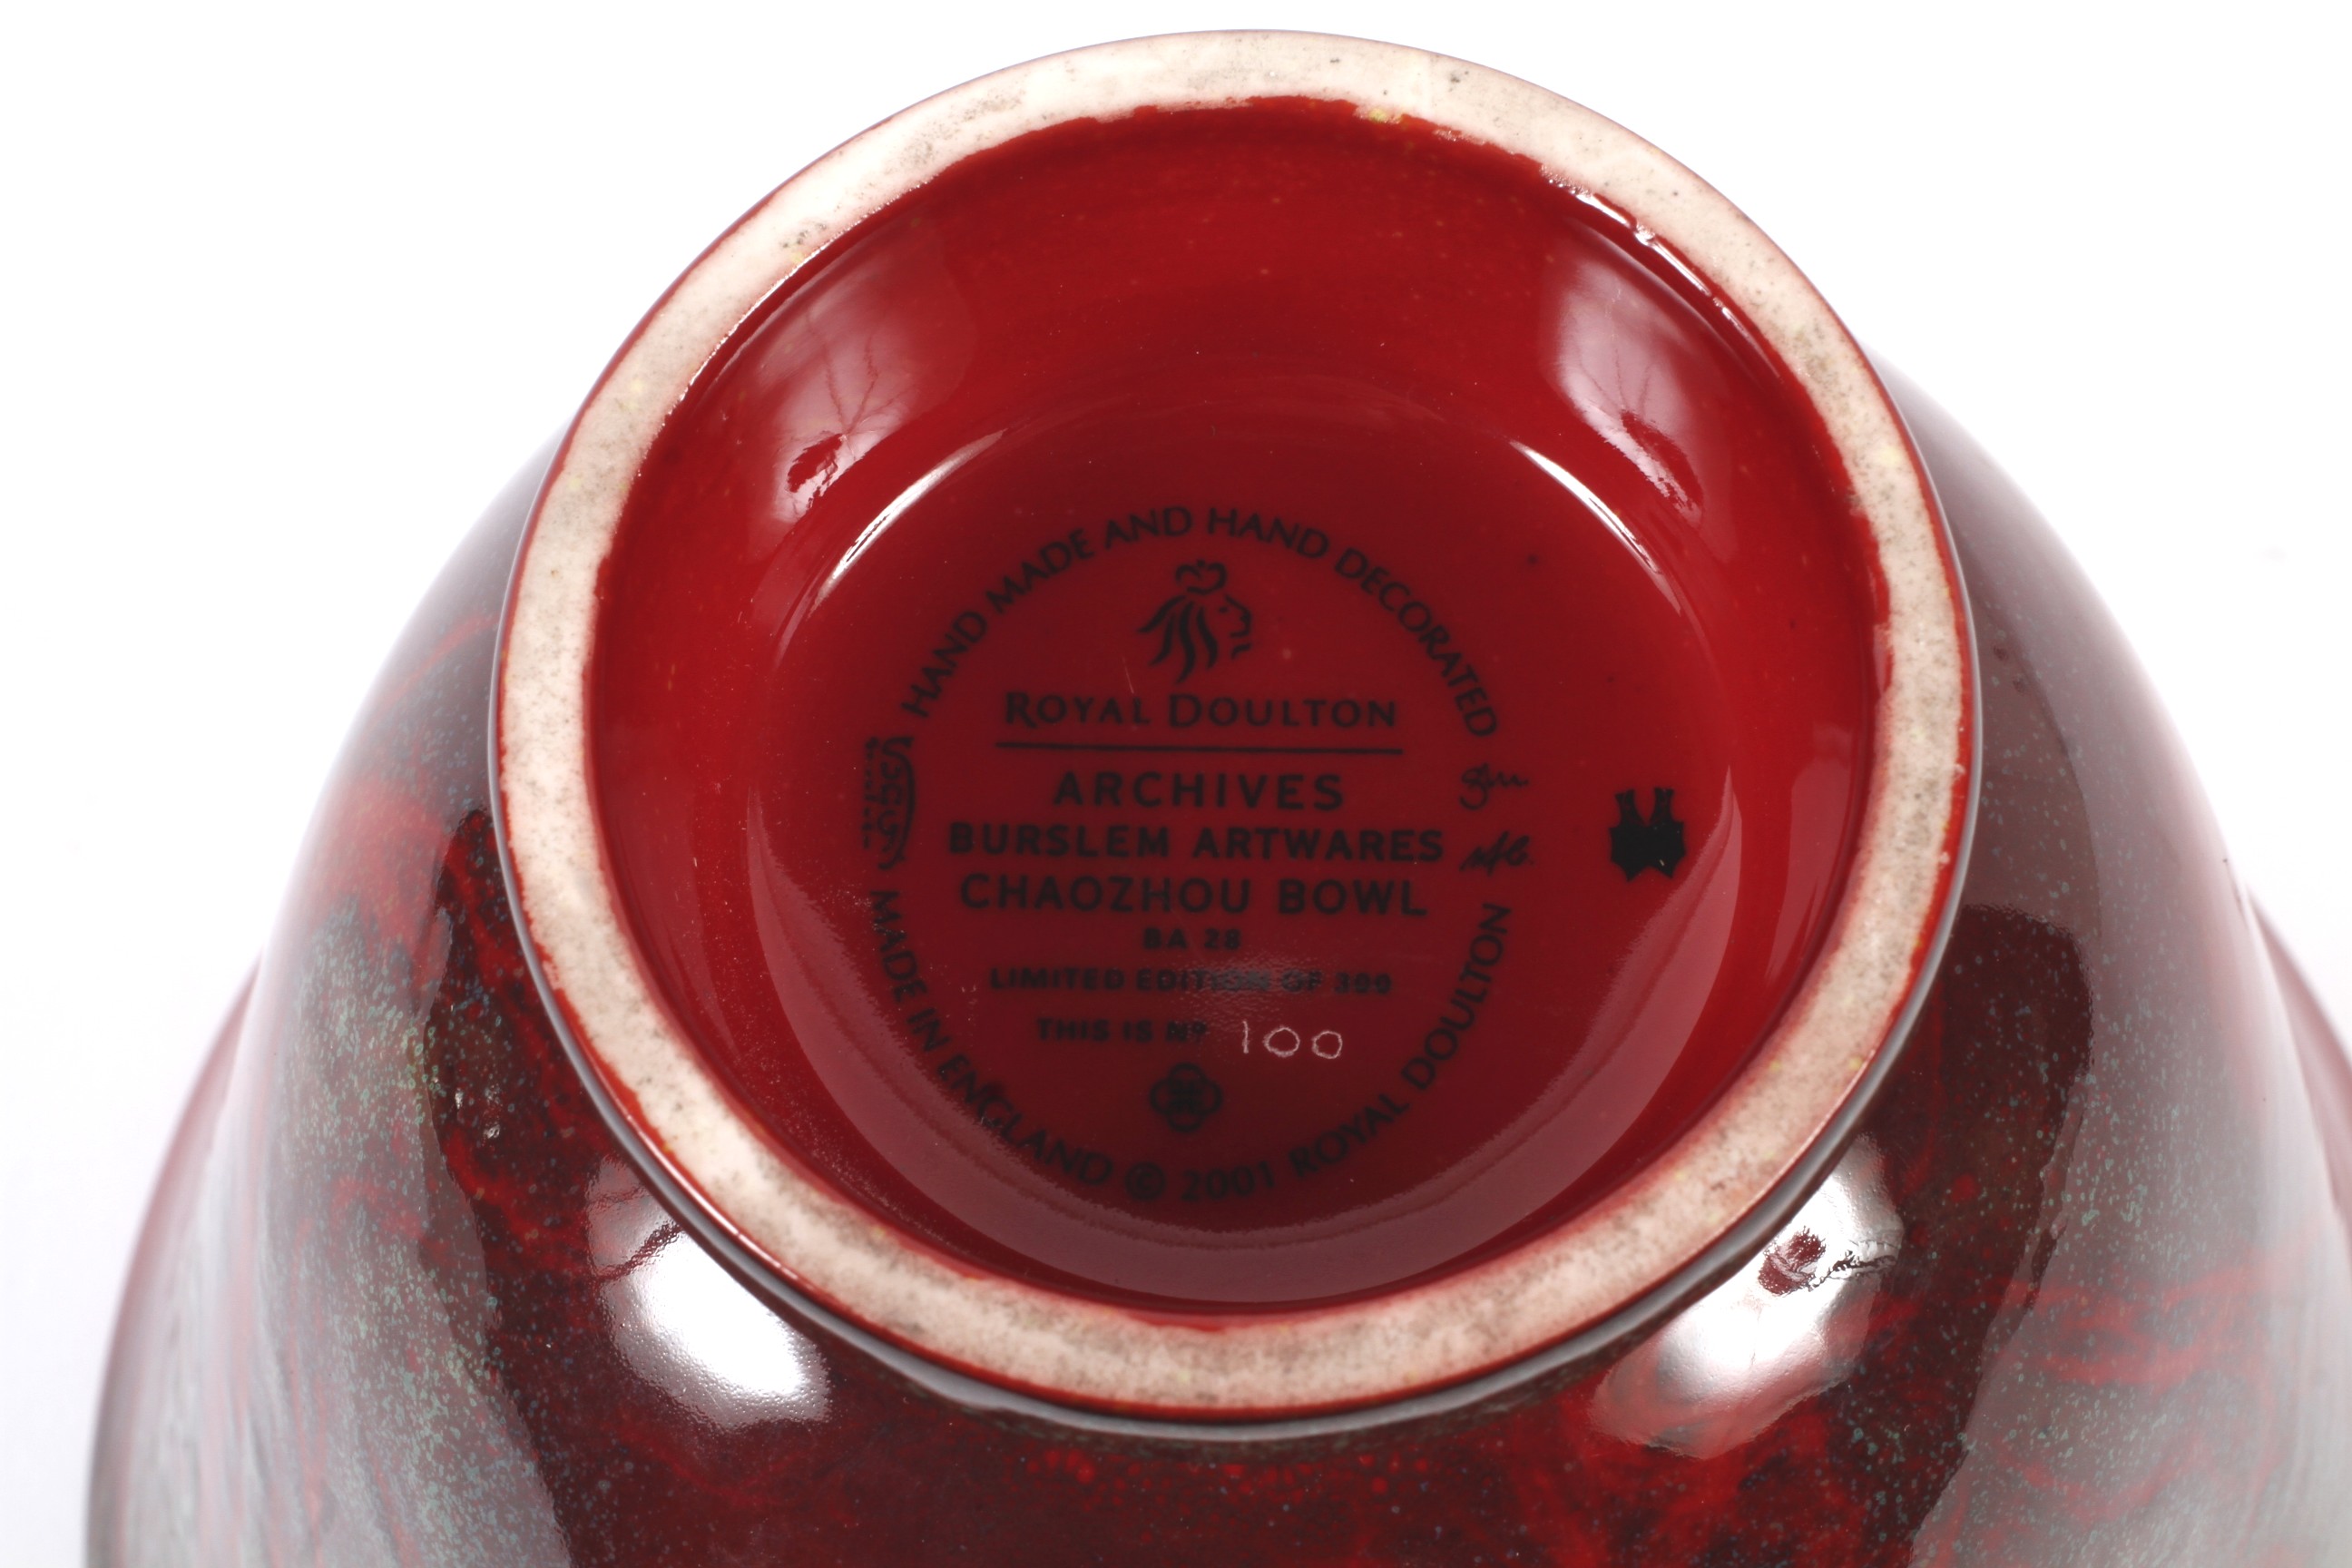 A boxed limited edition Royal Doulton Chaozhou flambe glazed bowl. - Image 3 of 3